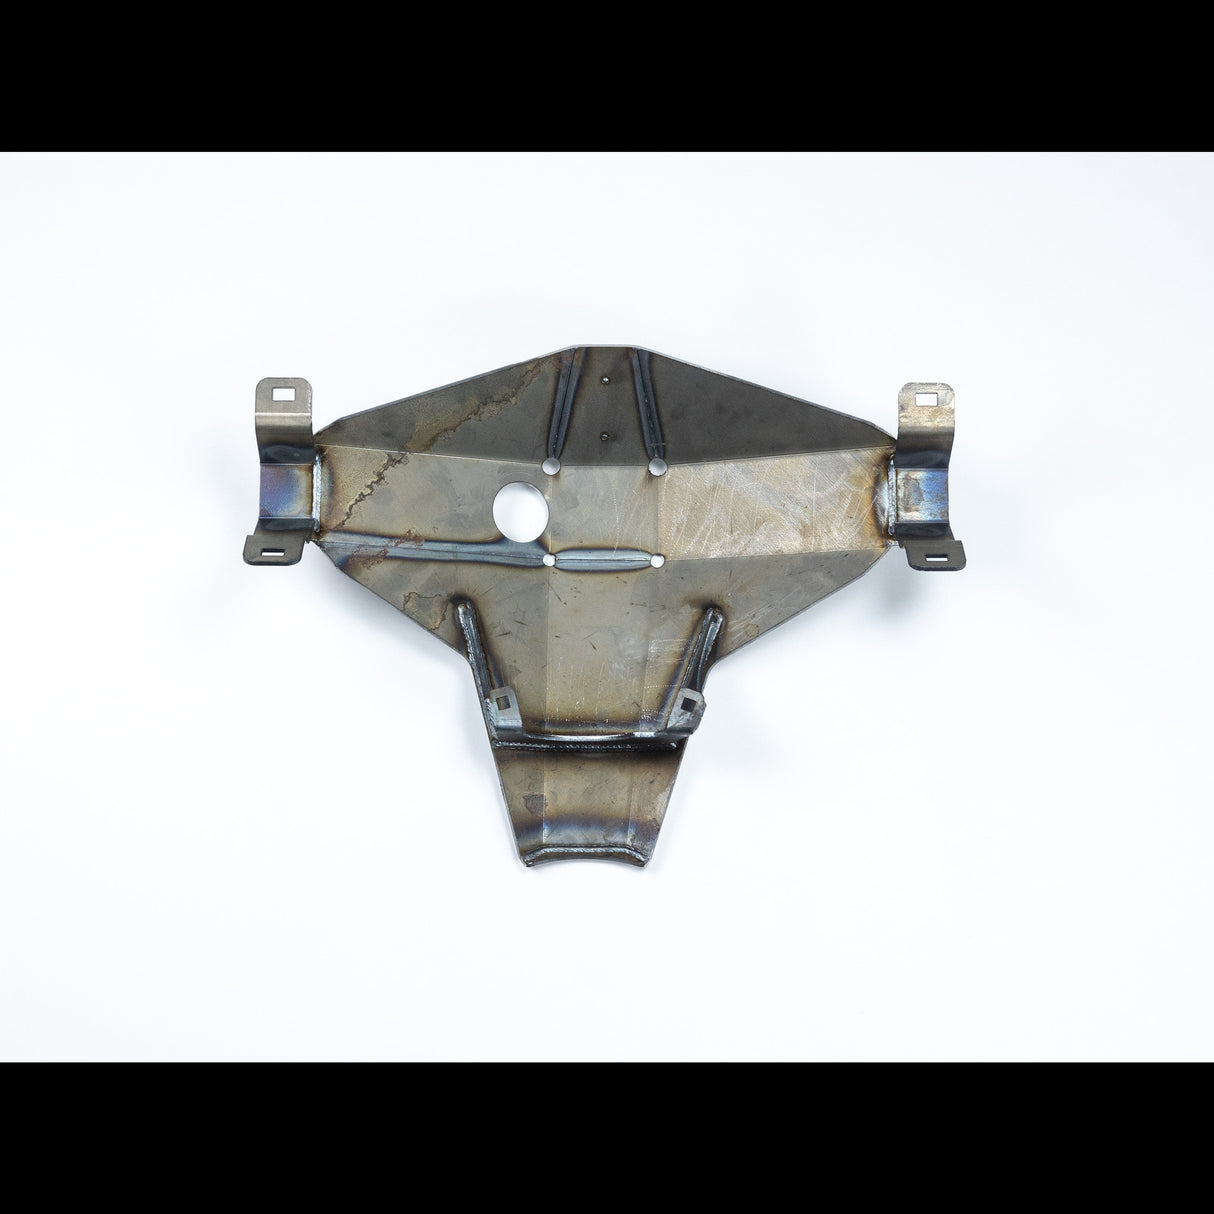 Tacoma Rear Differential Skid Plate / 3rd Gen / 2016+ - Blaze Off-Road